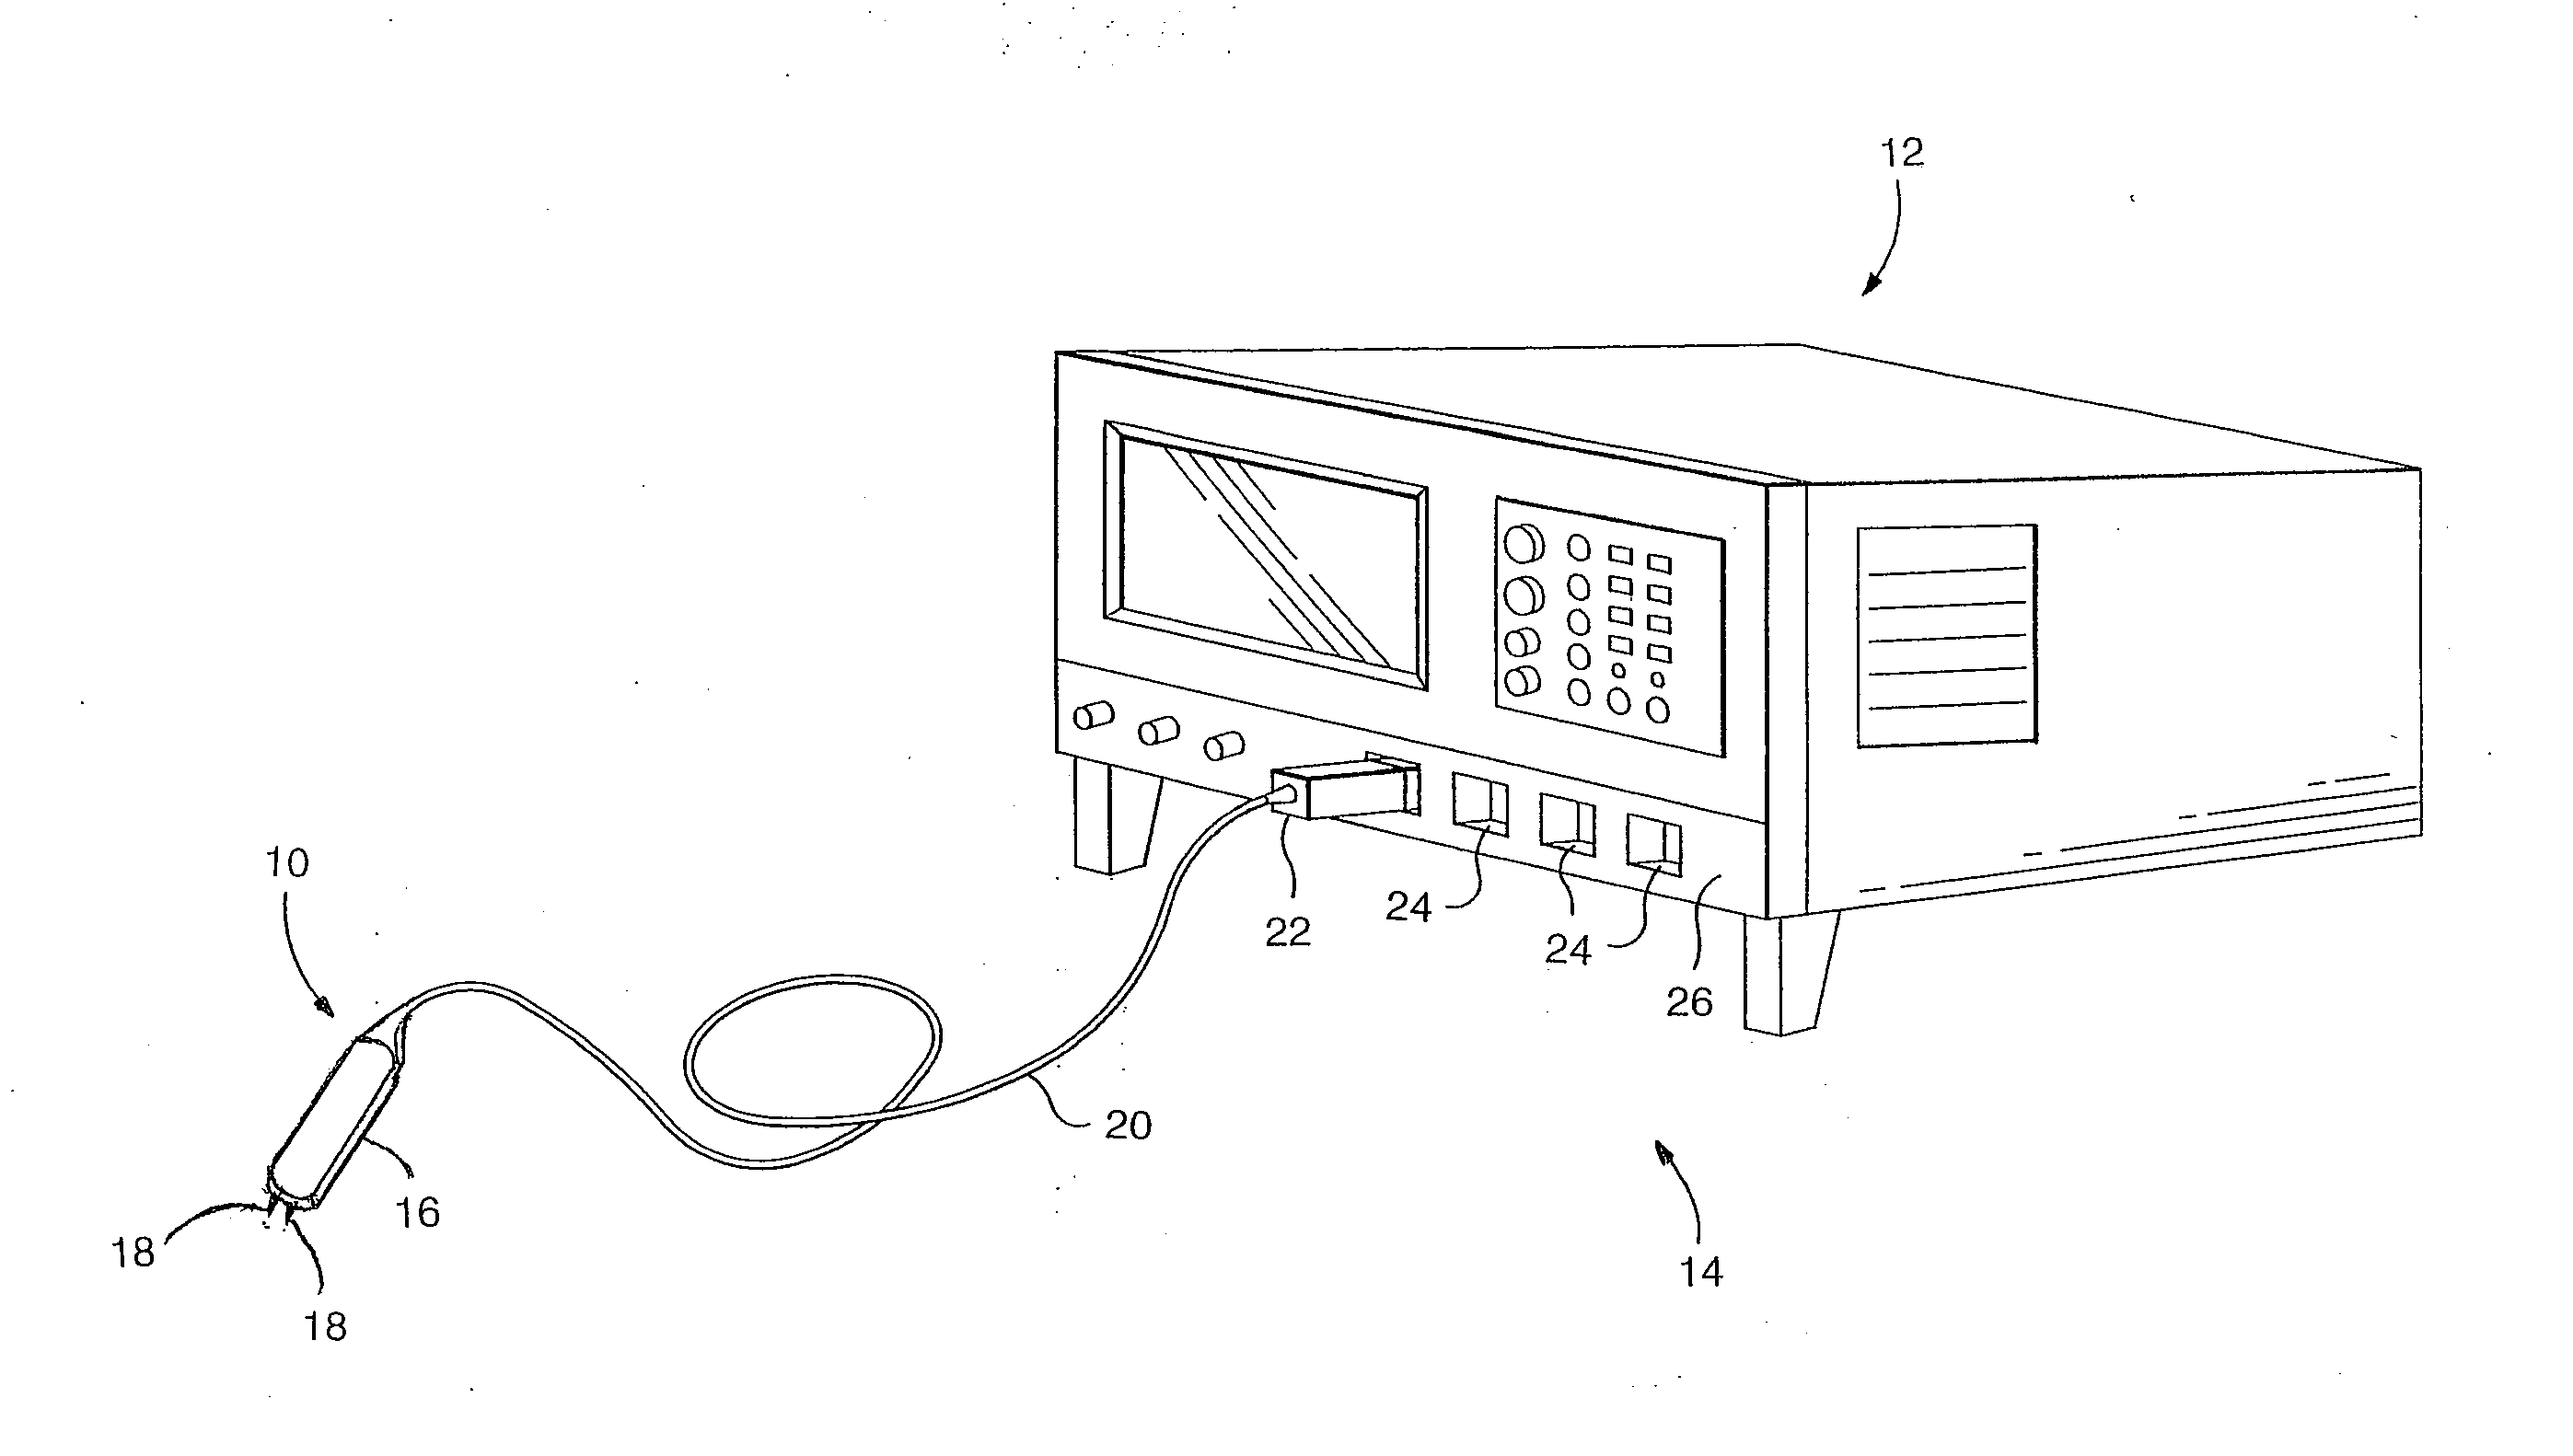 Signal Acquisition Probe Storing Compressed or Compressed and Filtered Time Domain Impulse or Step Response Data for Use in a Signal Measurement System